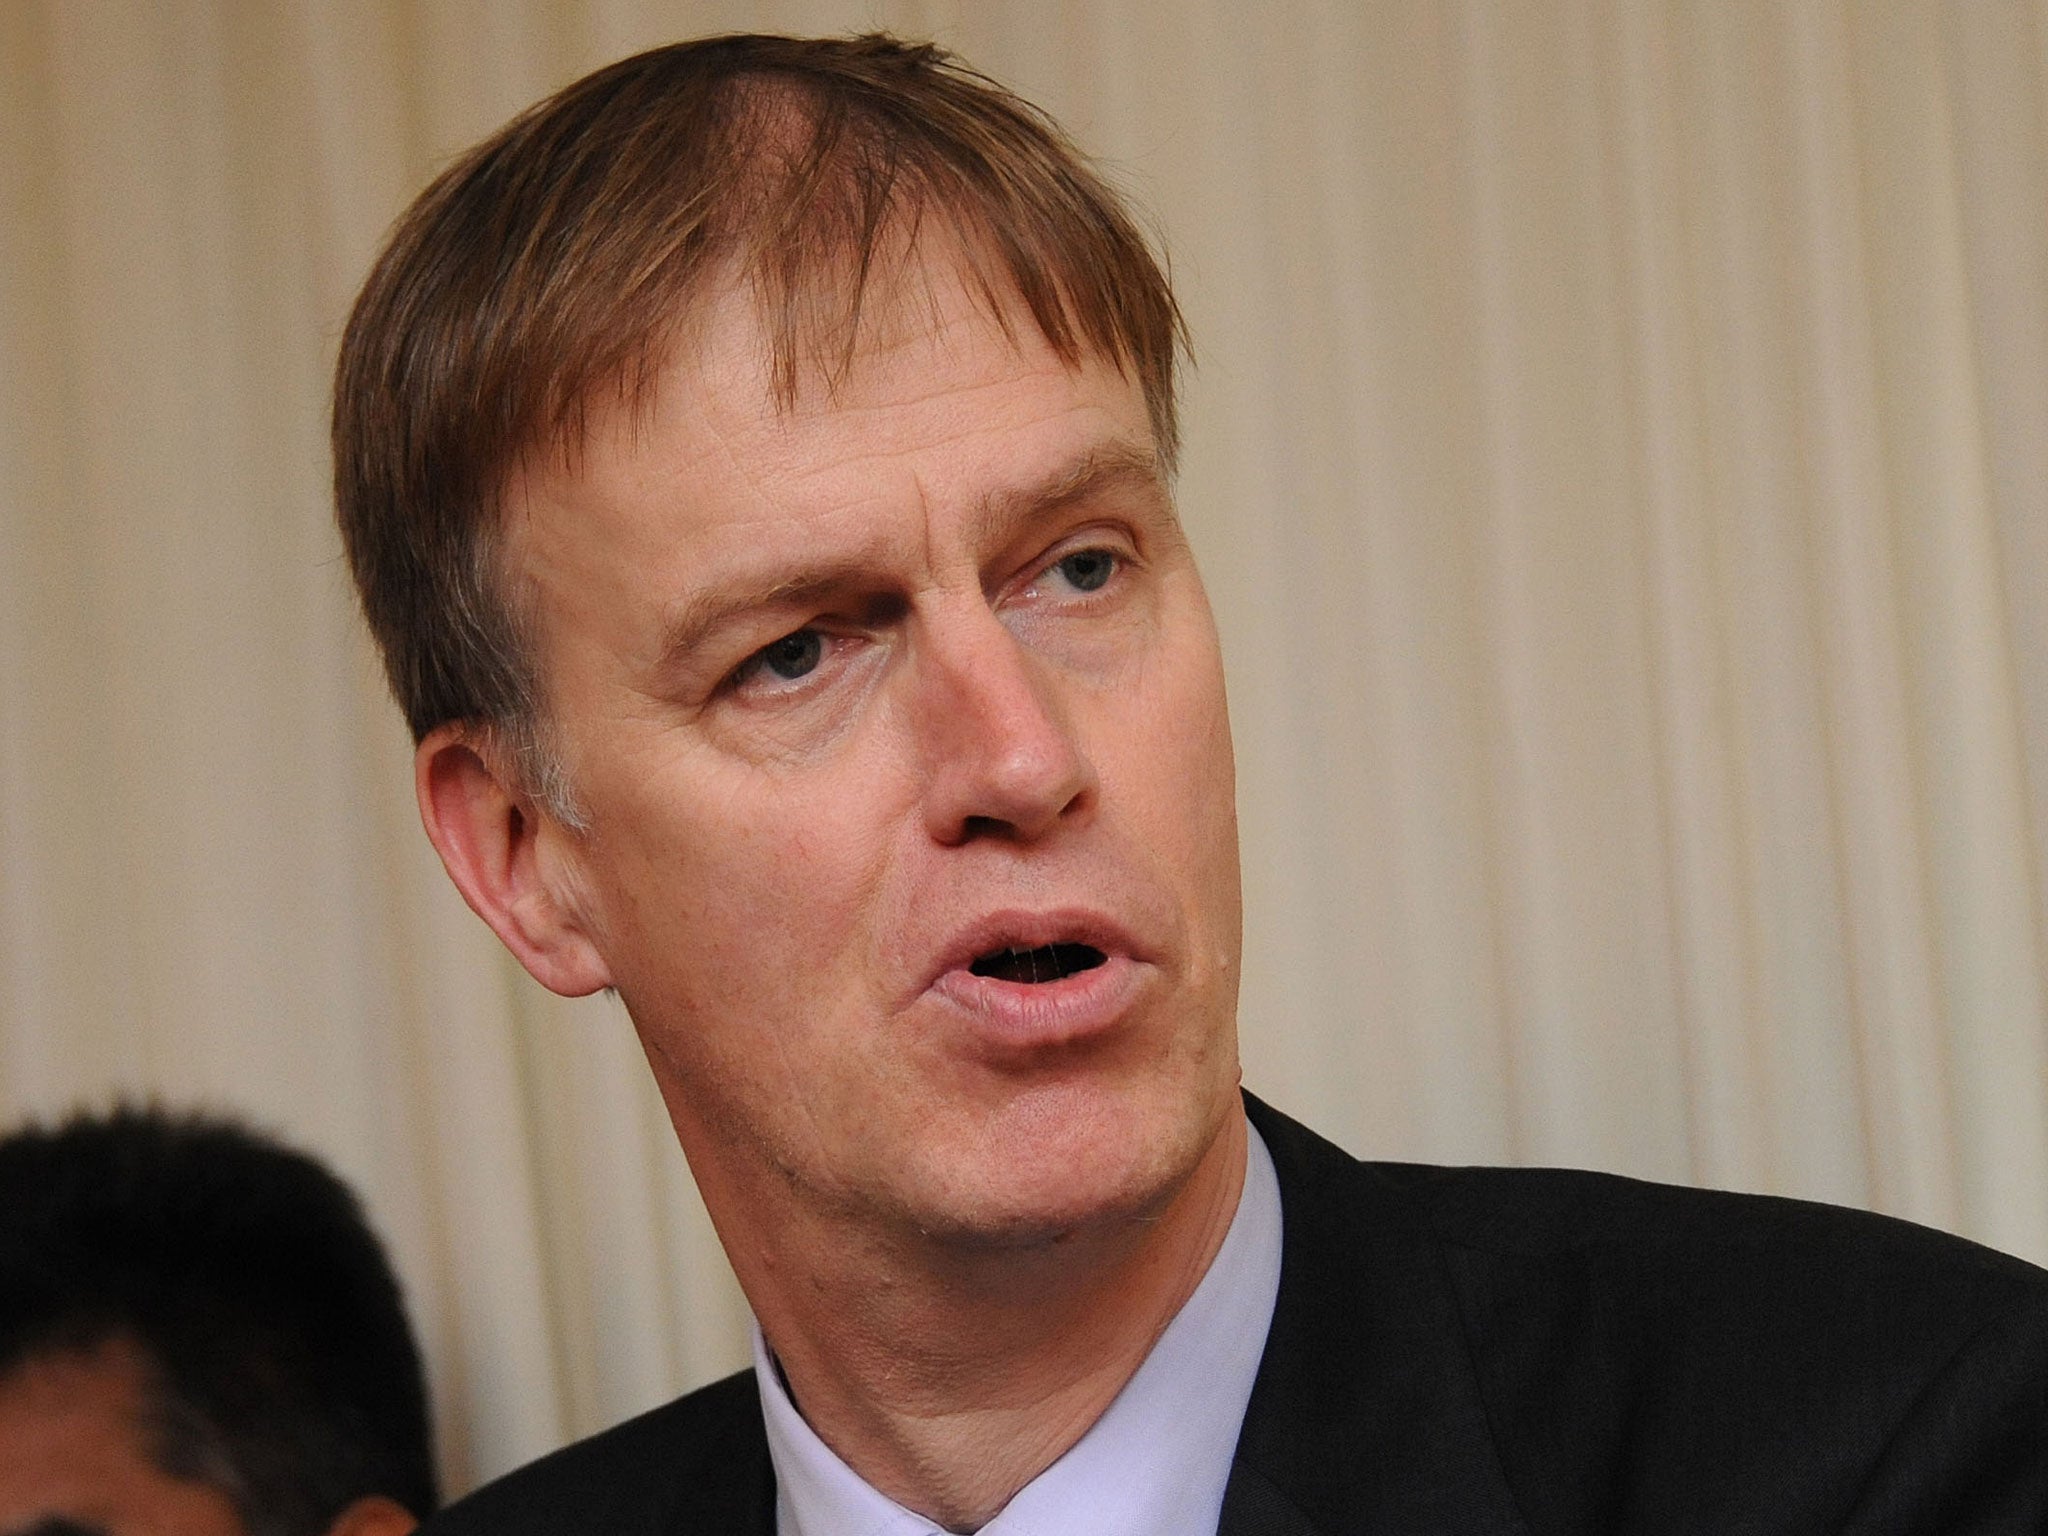 Stephen Timms, Labour’s welfare spokesman, will call for the NAO to issue reports to Parliament every three months on the scheme’s progress and value for money